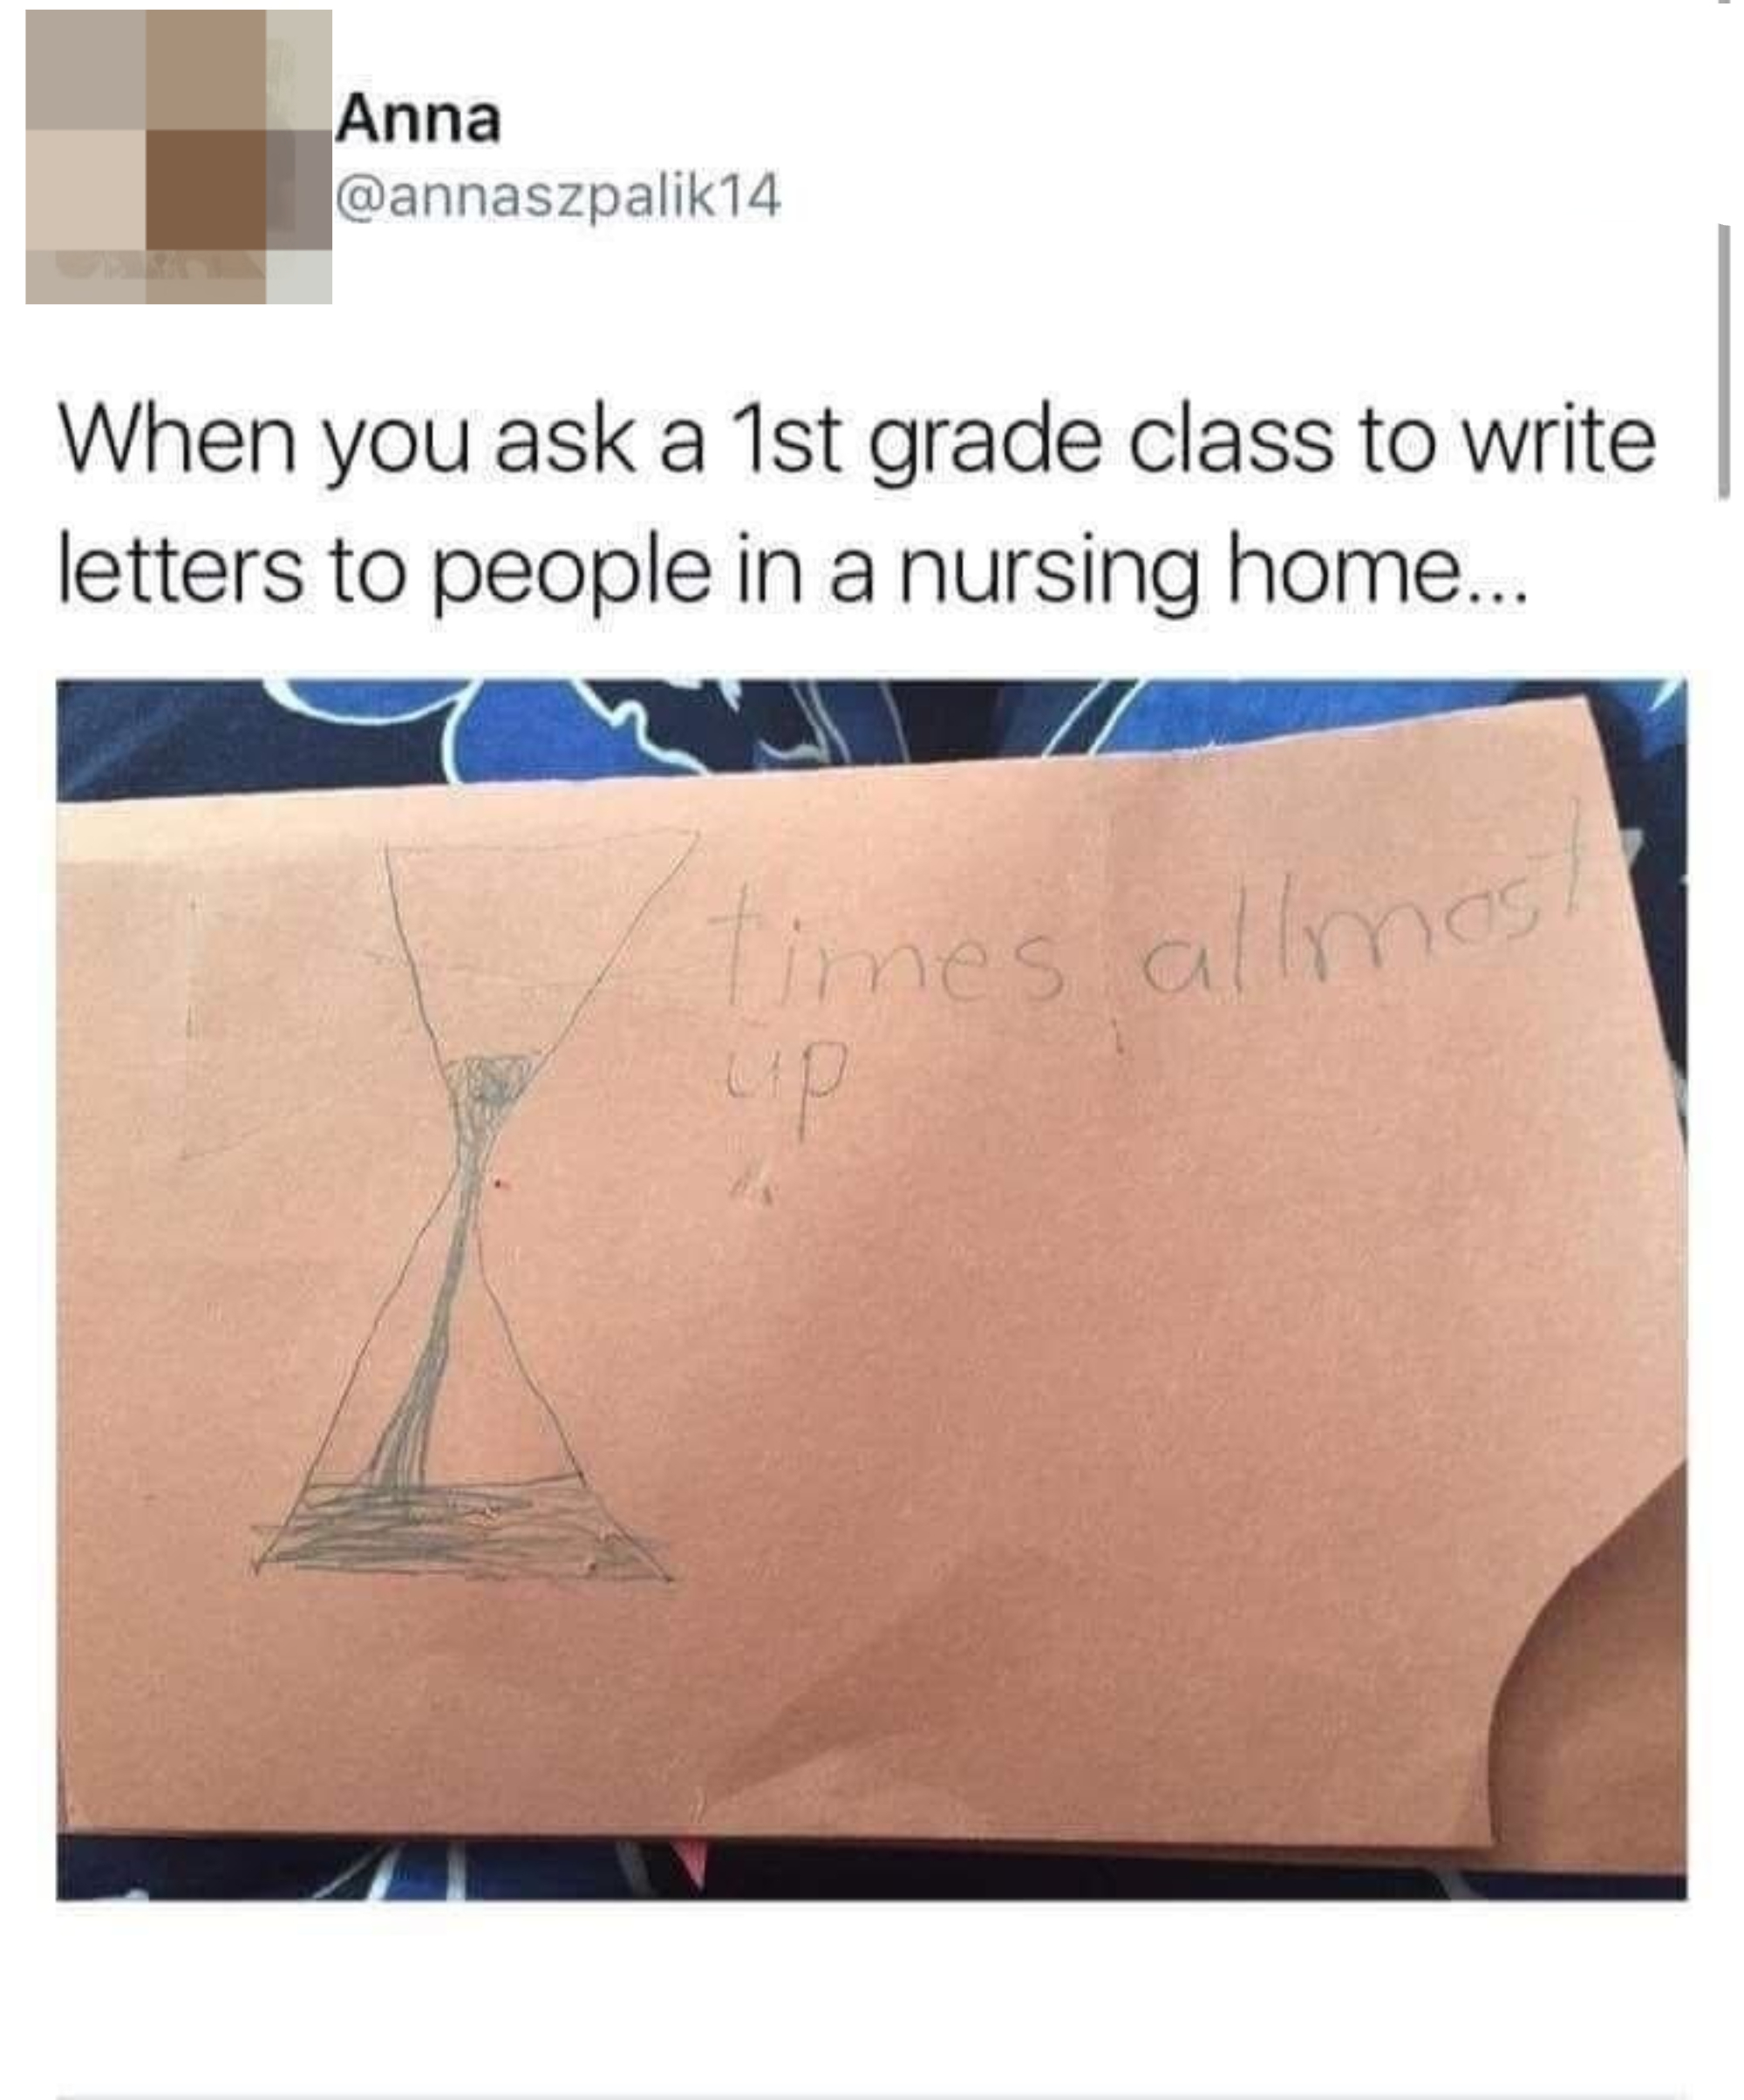 &quot;When you ask a 1st grade class to write letters to people in a nursing home&quot; with a drawing of an hourglass the the writing &quot;times allmost up&quot;